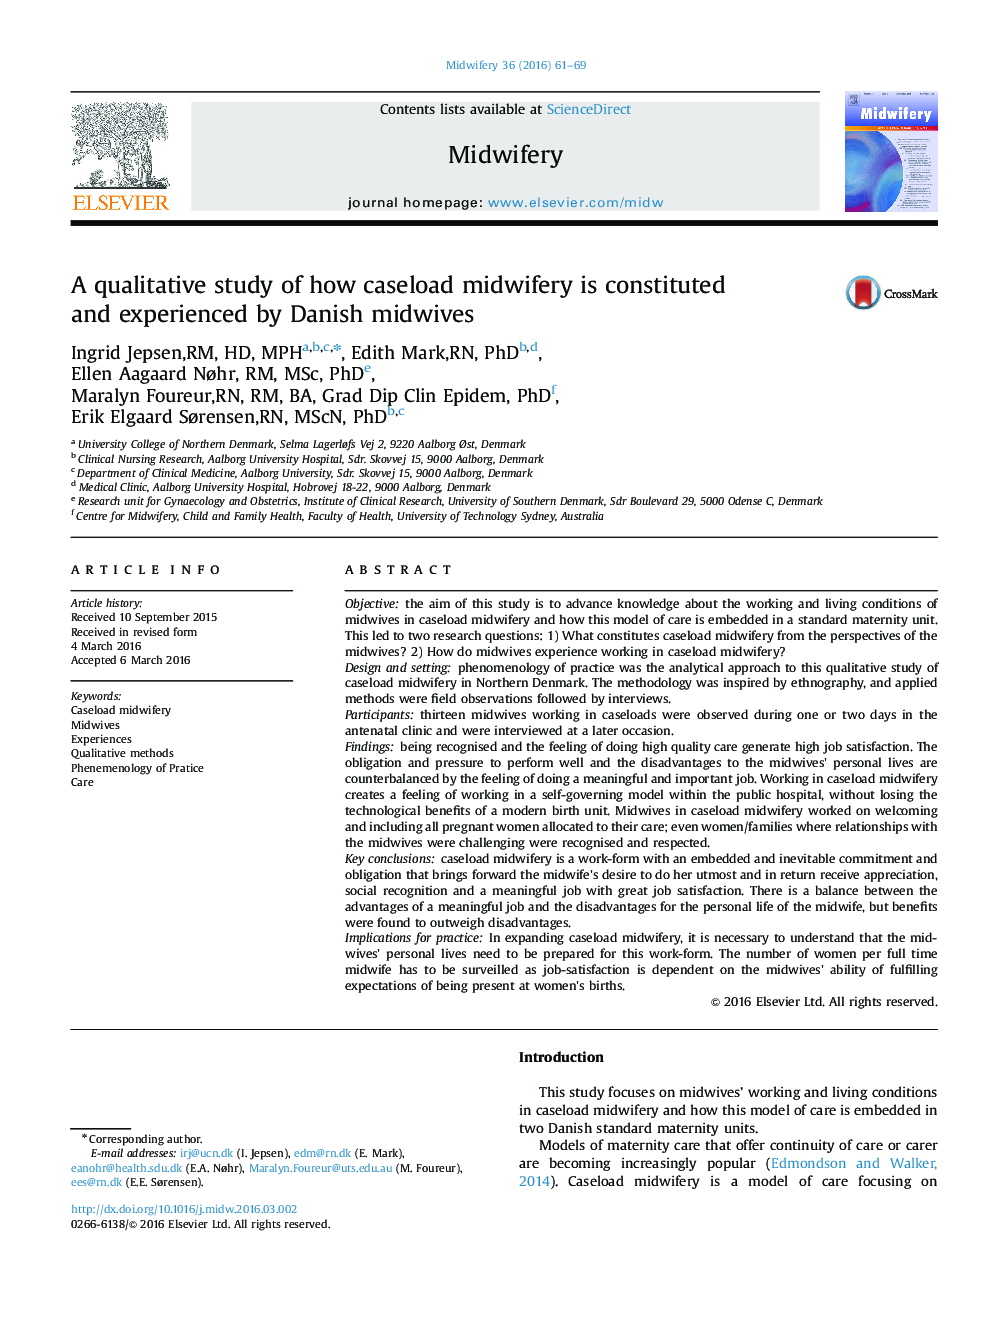 A qualitative study of how caseload midwifery is constituted and experienced by Danish midwives